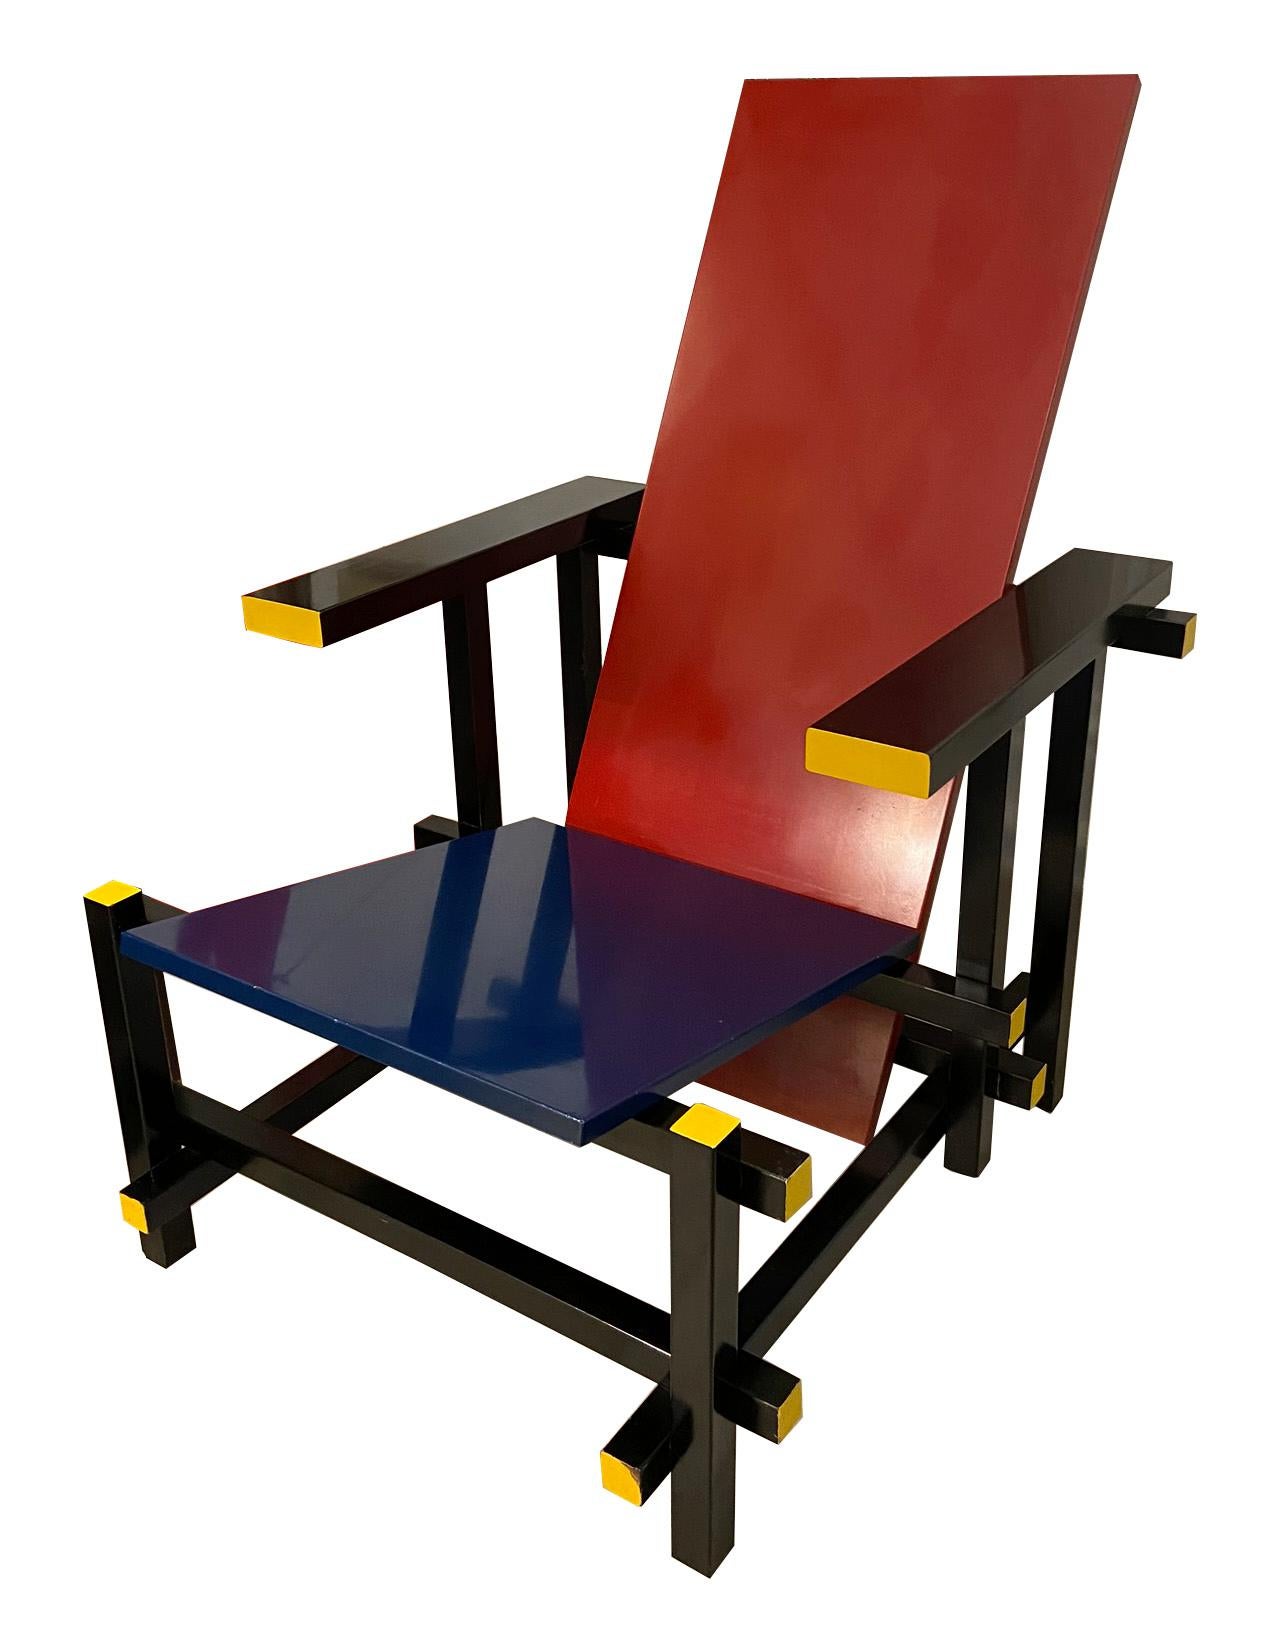 Design iconic chair of all design chairs, this rare and worldwide famous so called red blue chair designed by one of the most important architects and designers Holland has ever known. This chair was originally designed in 1923 but was produced and